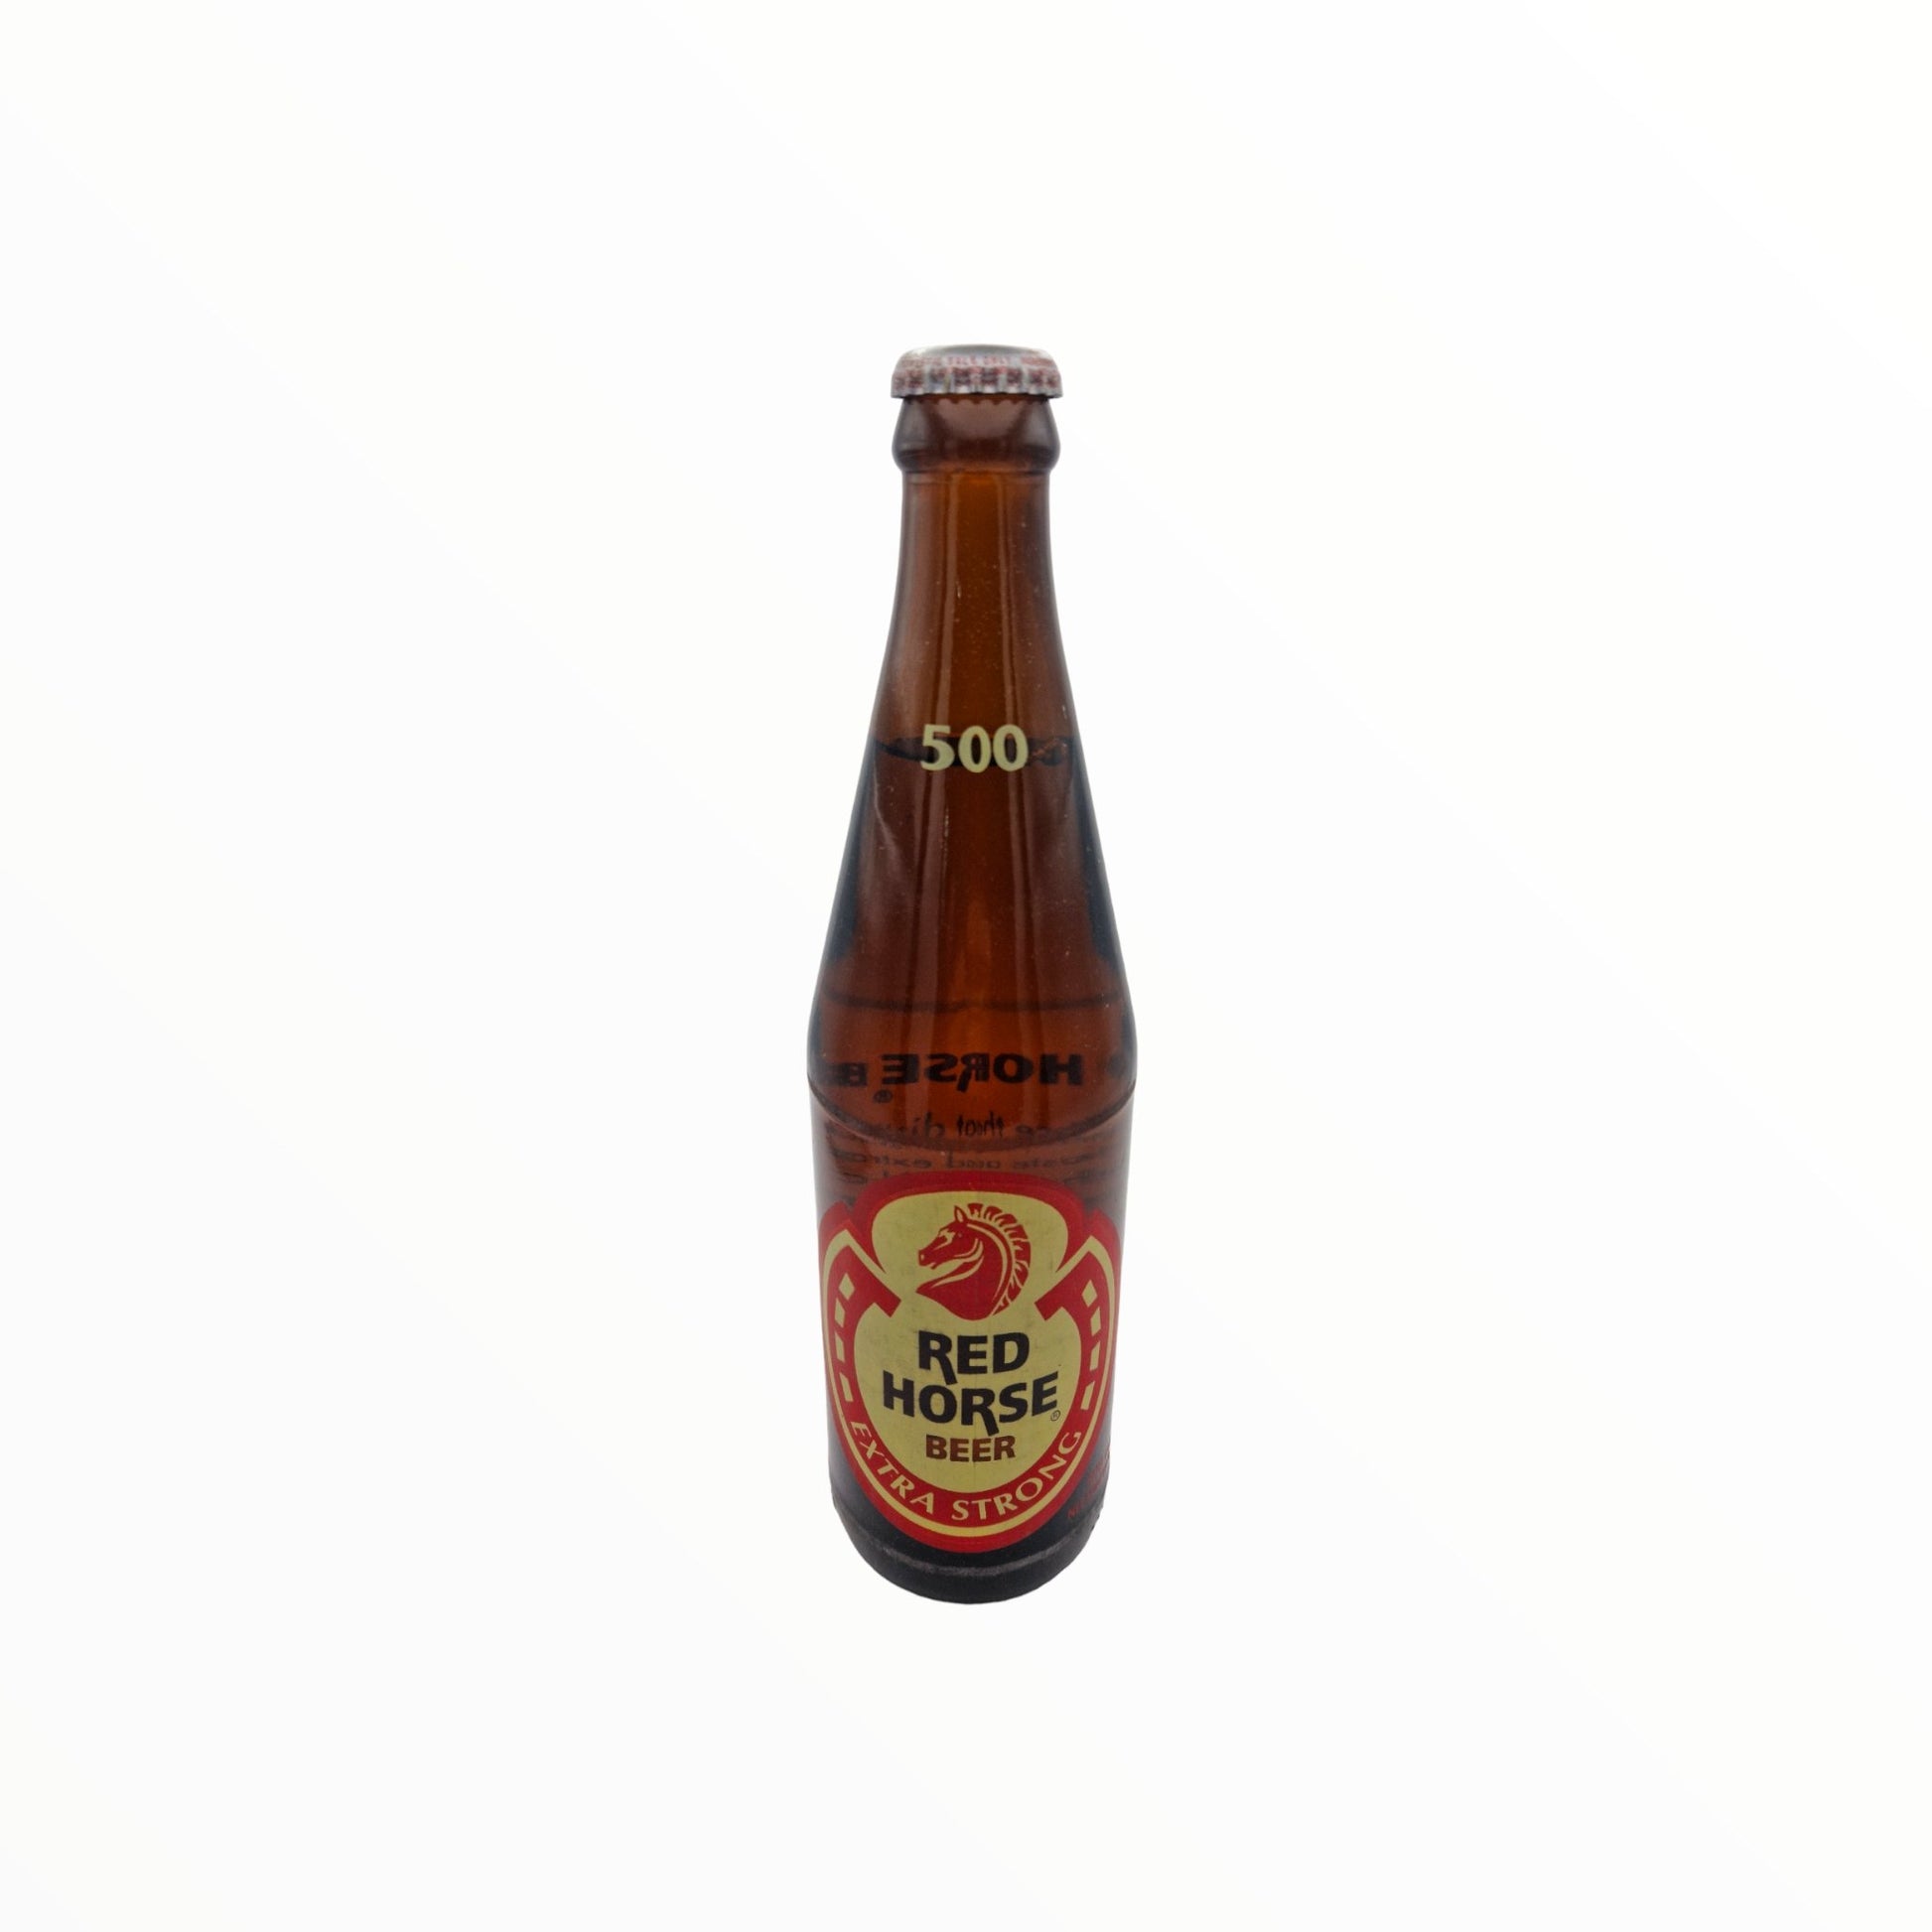 Red Horse Bier Extra Stark 500ml - Mabuhay Pinoy Asia Shop